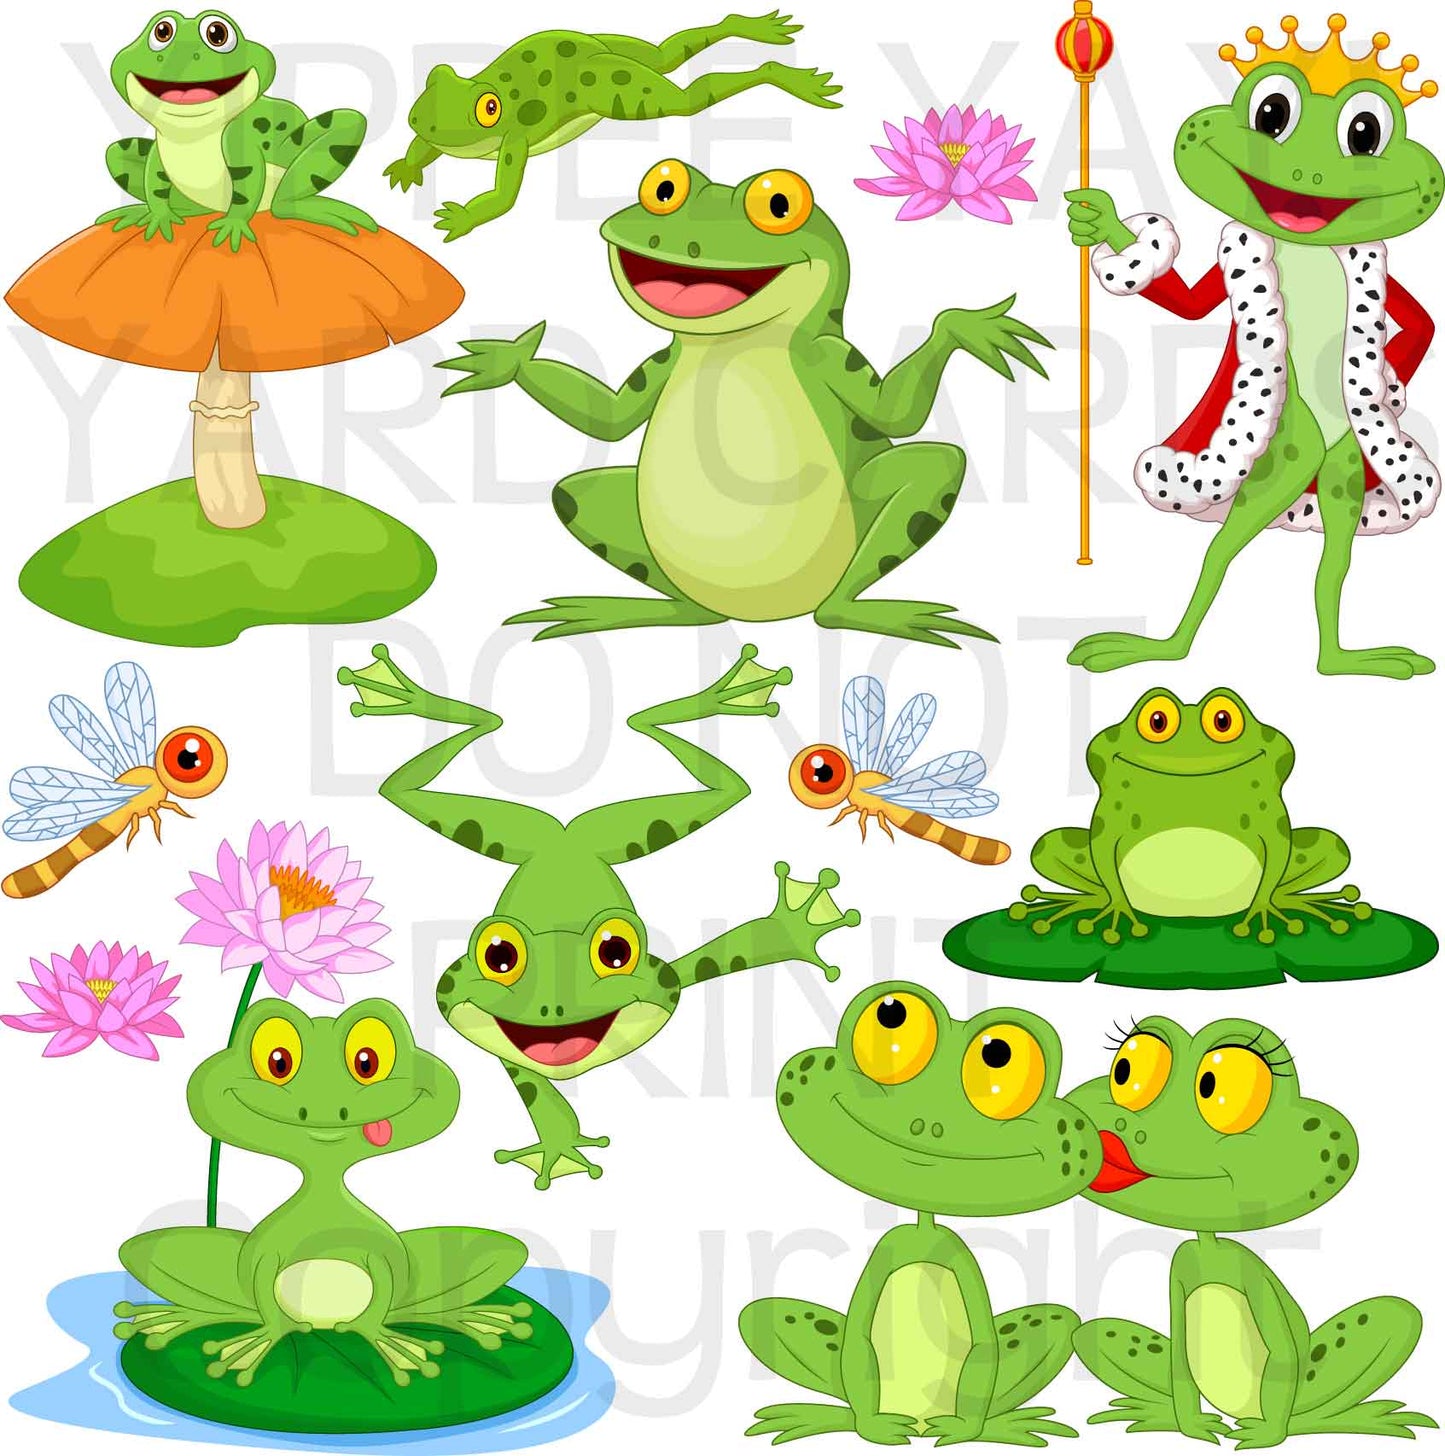 Frogs Half Sheet Misc. (Must Purchase 2 Half sheets - You Can Mix & Match)